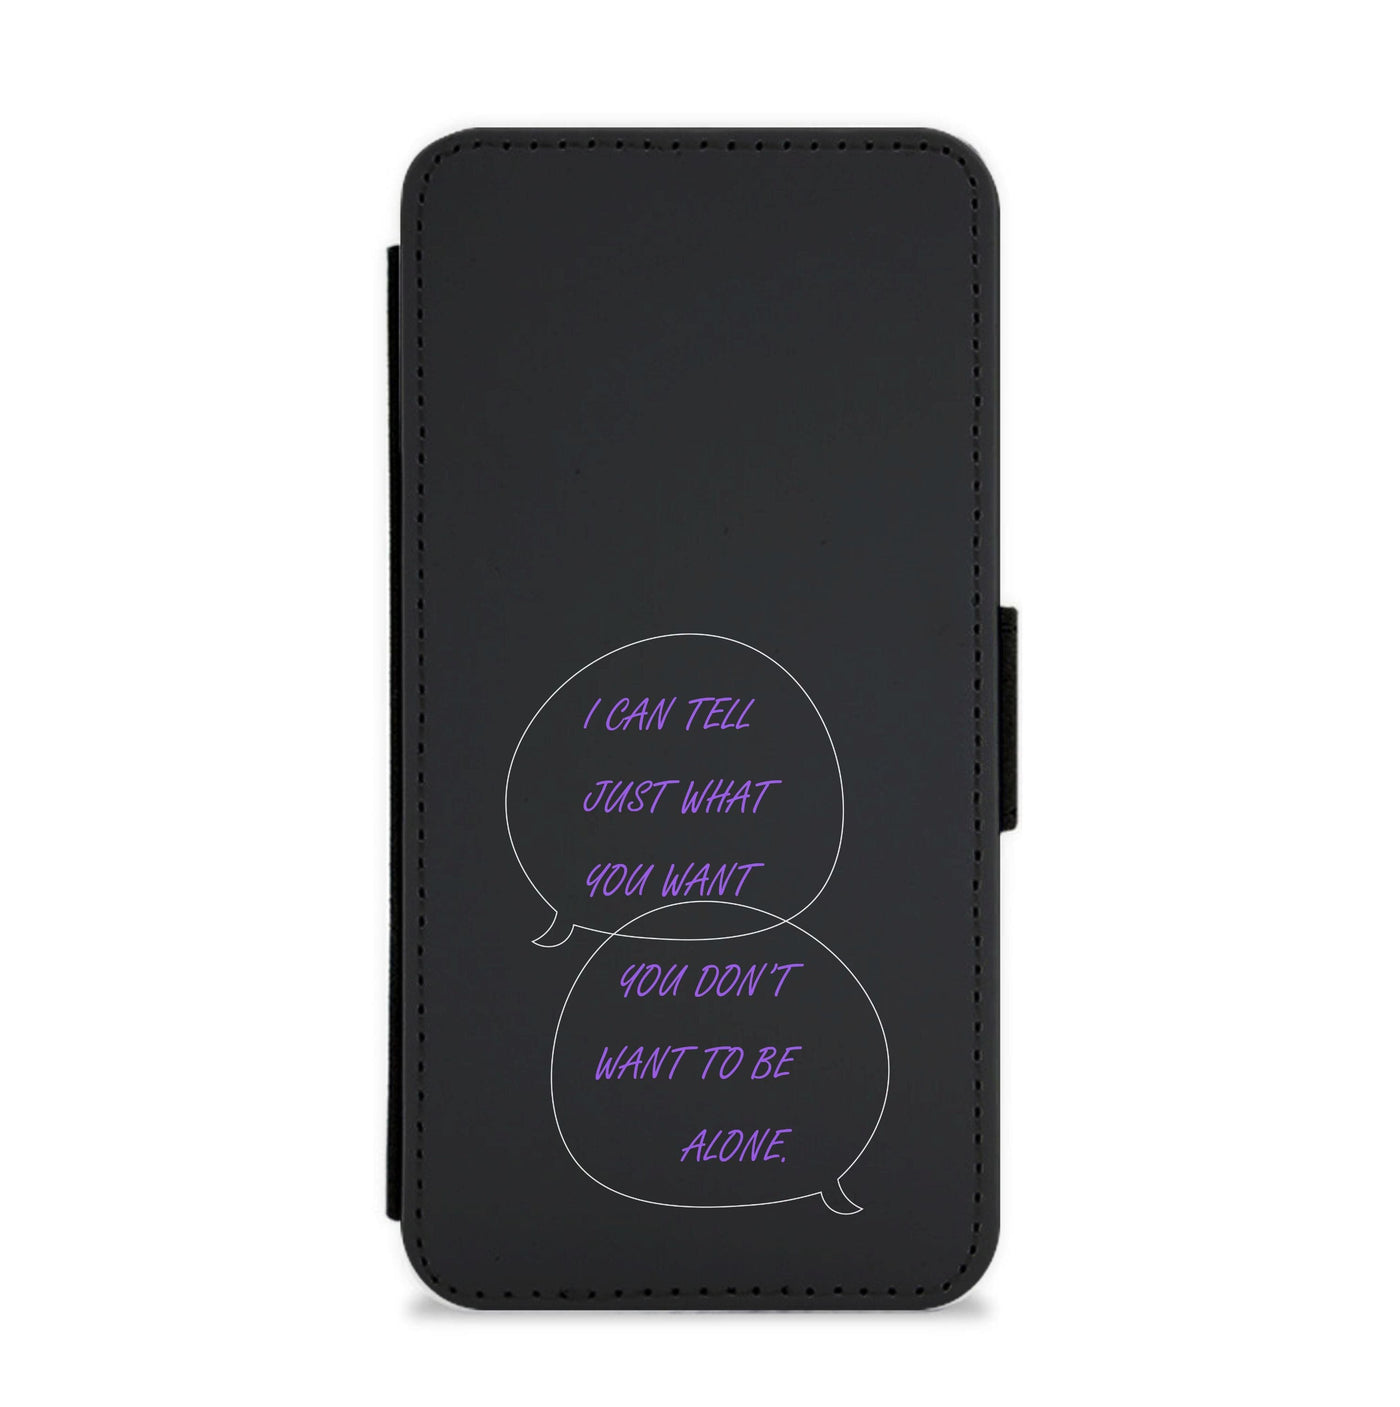 You Don't Want To Be Alone - Festival Flip / Wallet Phone Case